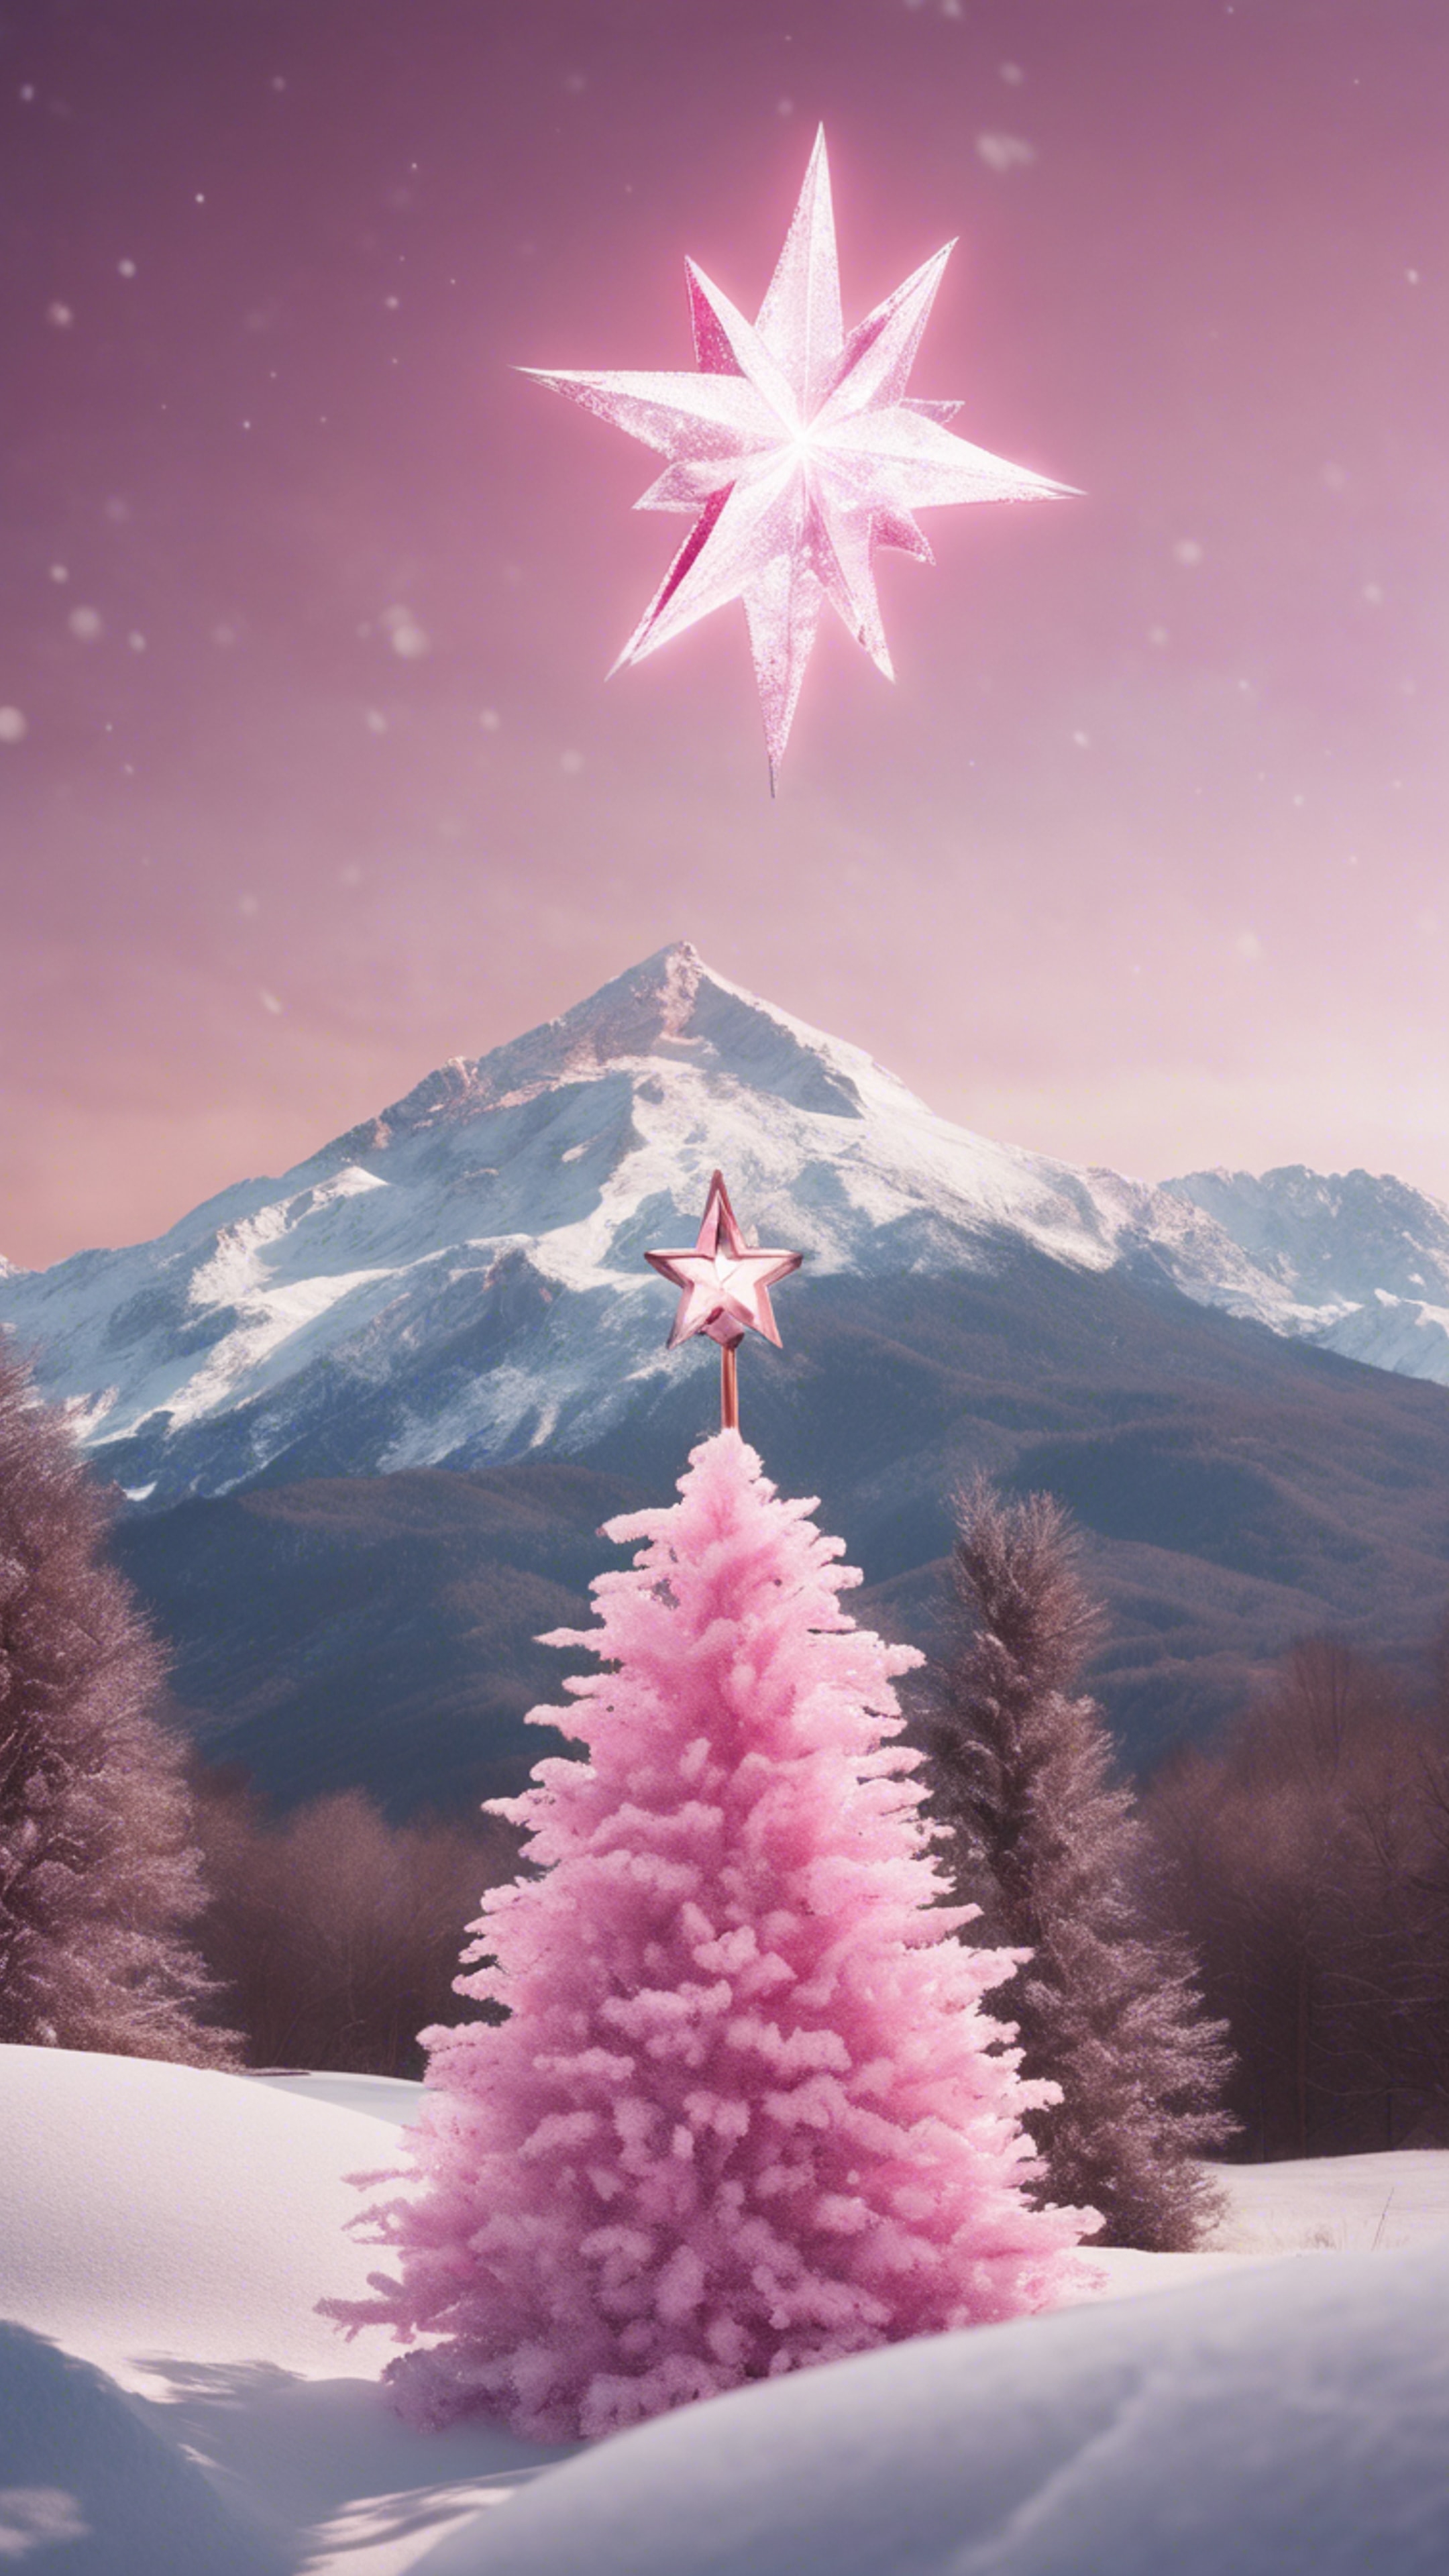 Distant view of a snow-clad mountain with a pink Christmas star shining brightly in the foreground. Tapeta[48430a4d610446a898be]